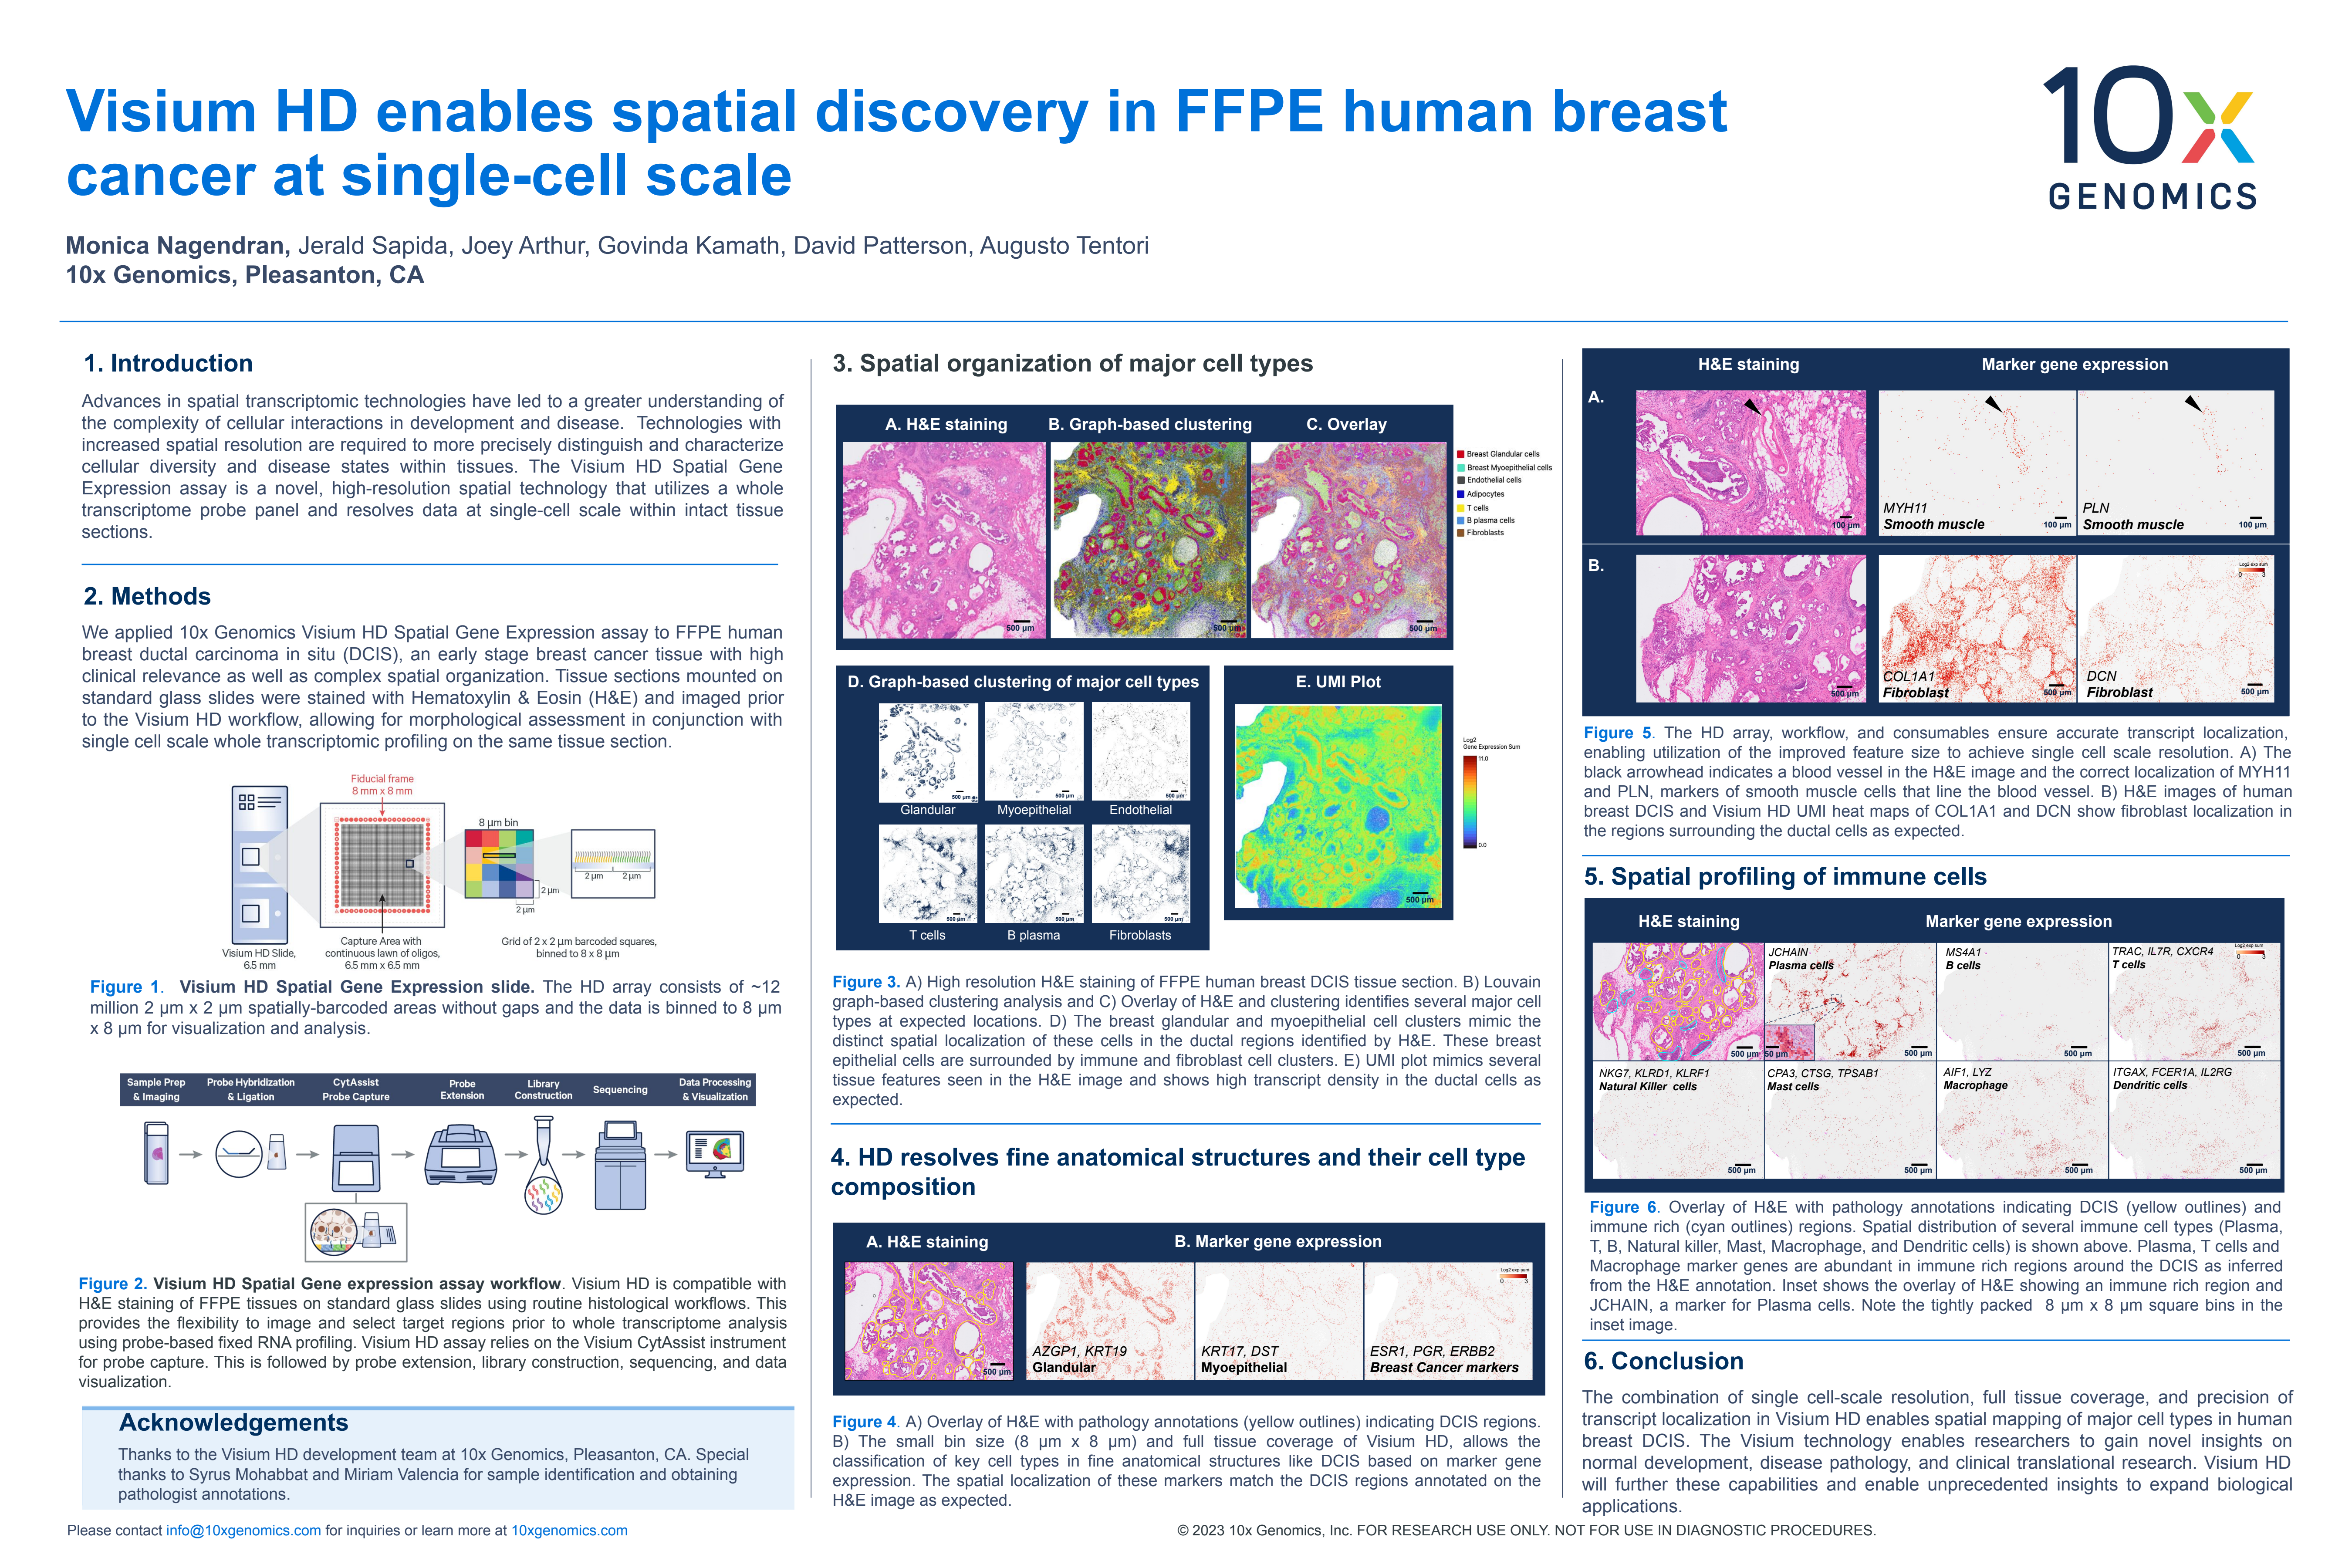 Visium HD enables spatial discovery in FFPE human breast cancer at single-cell scale